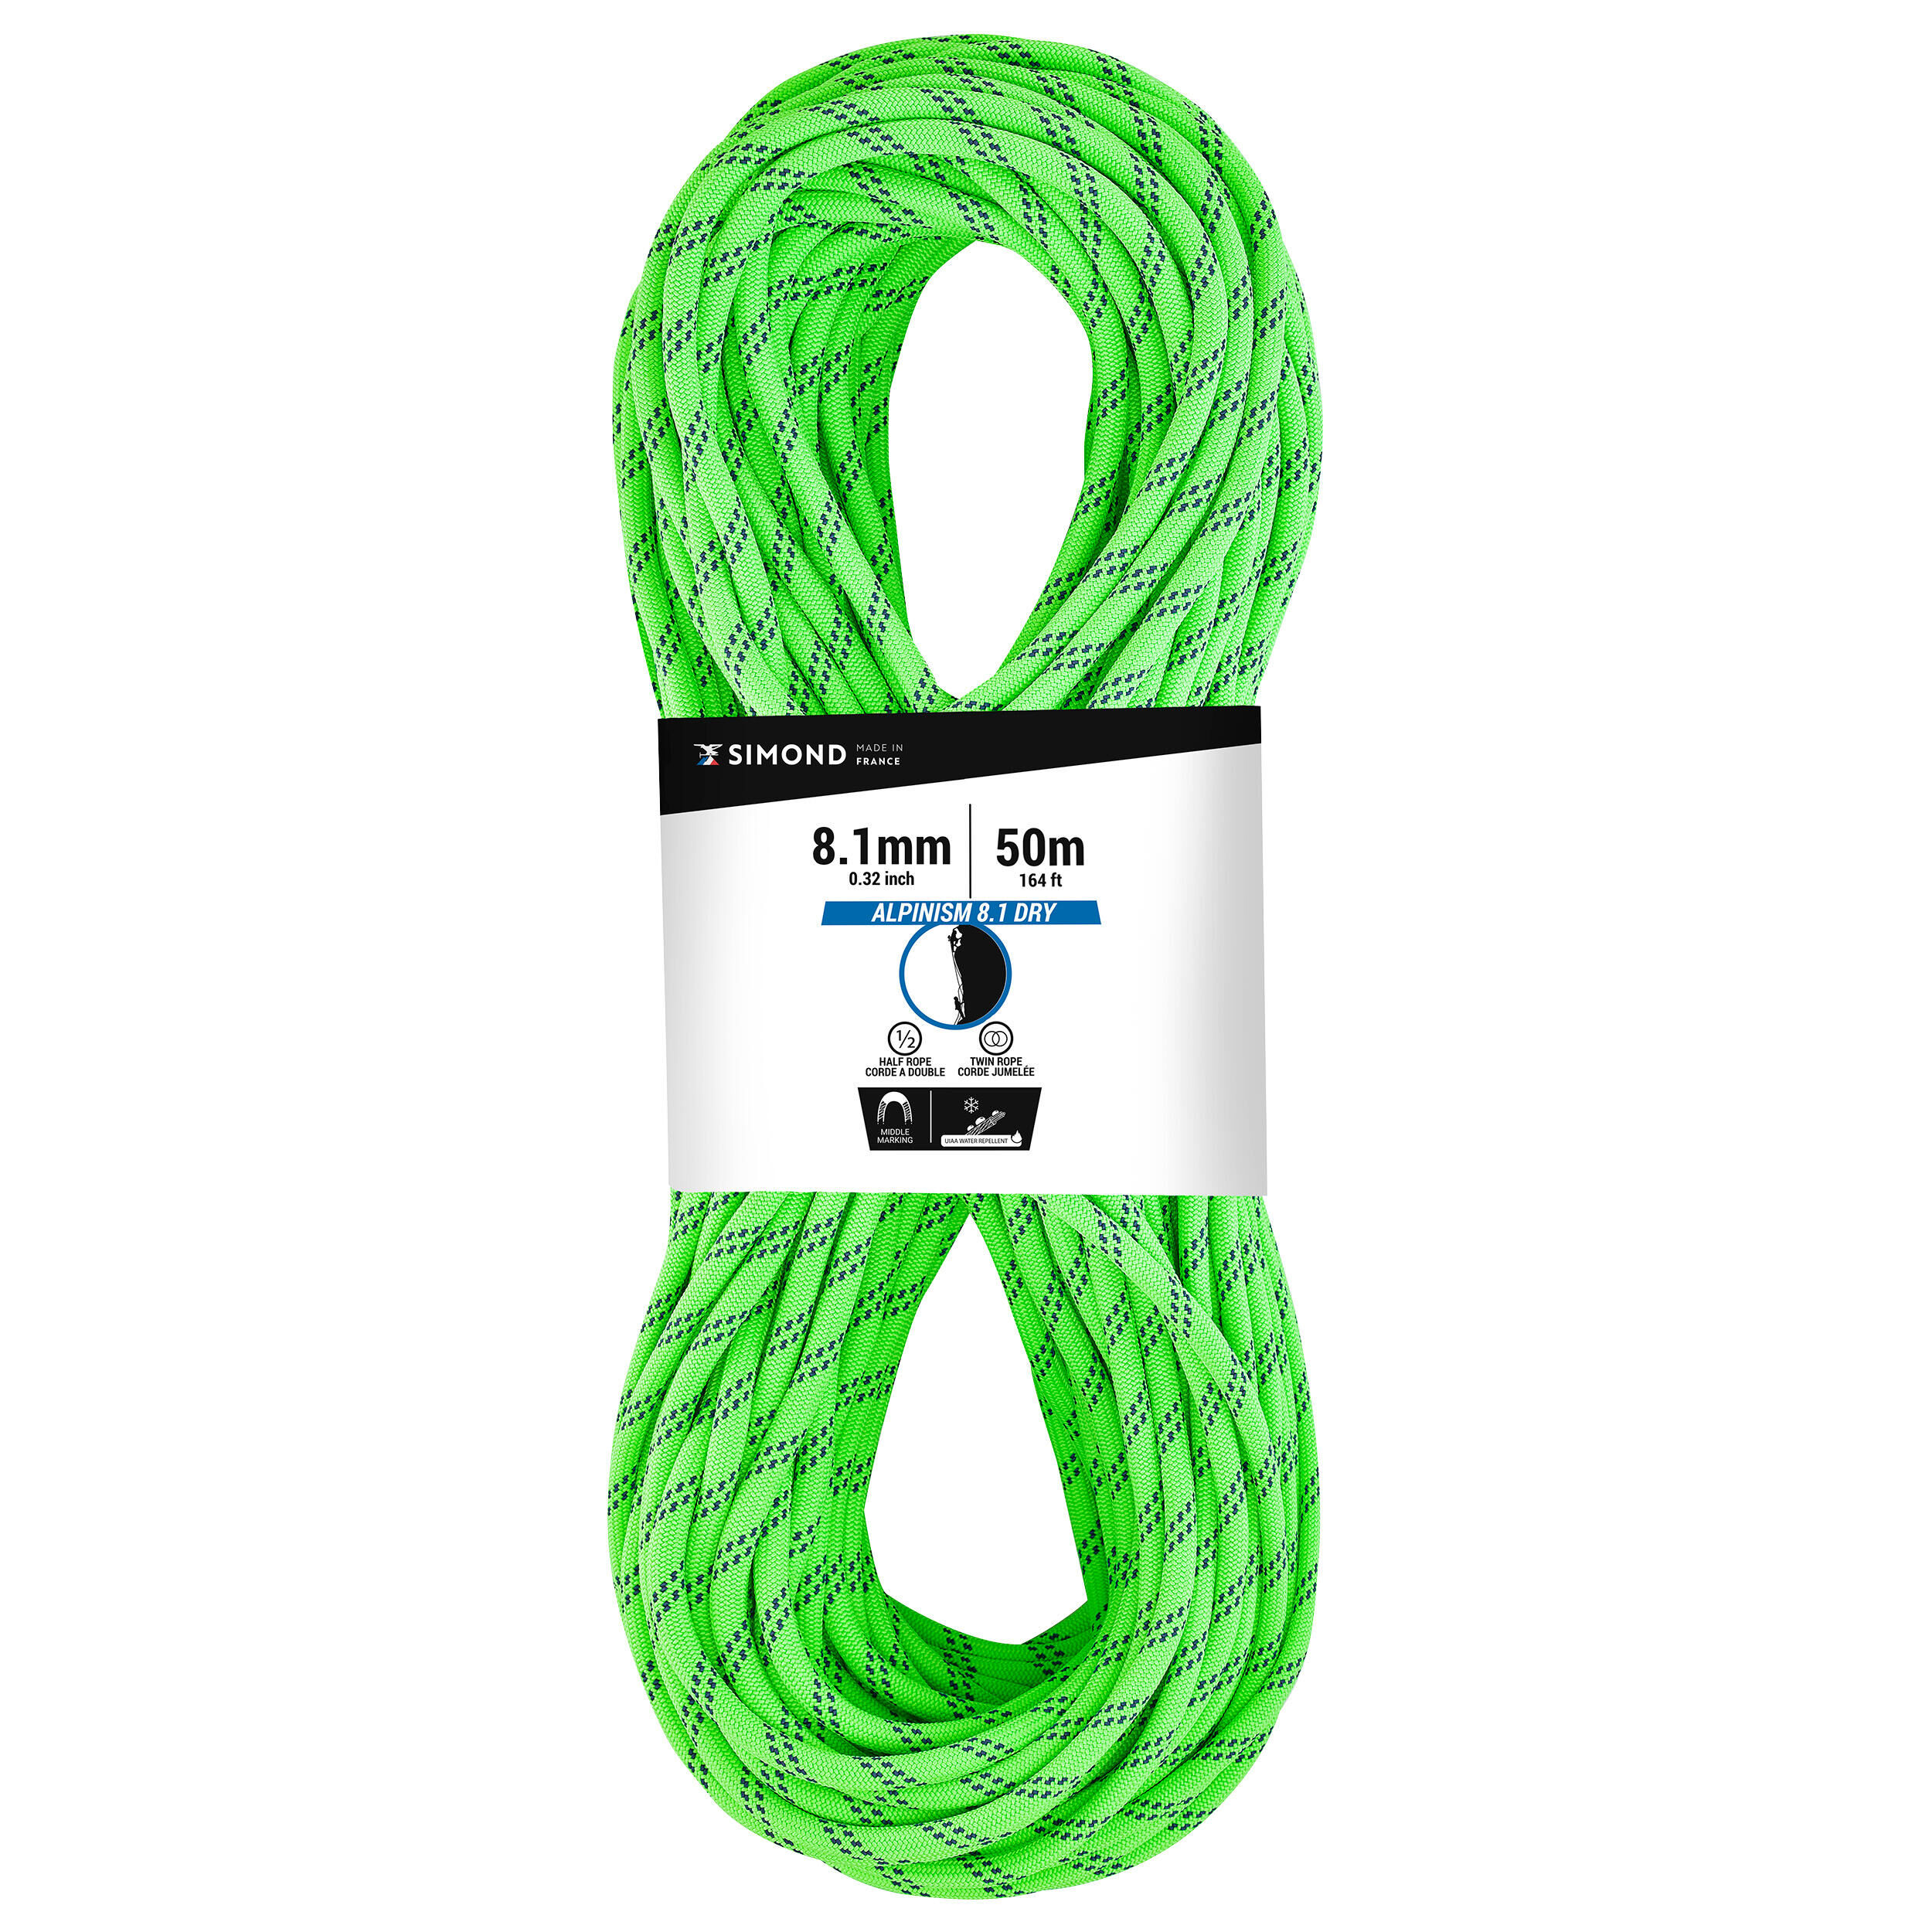 SIMOND MOUNTAINEERING AND CLIMBING HALF ROPE - ABSEIL ALPINISM 8.1 MM X 50M GREEN